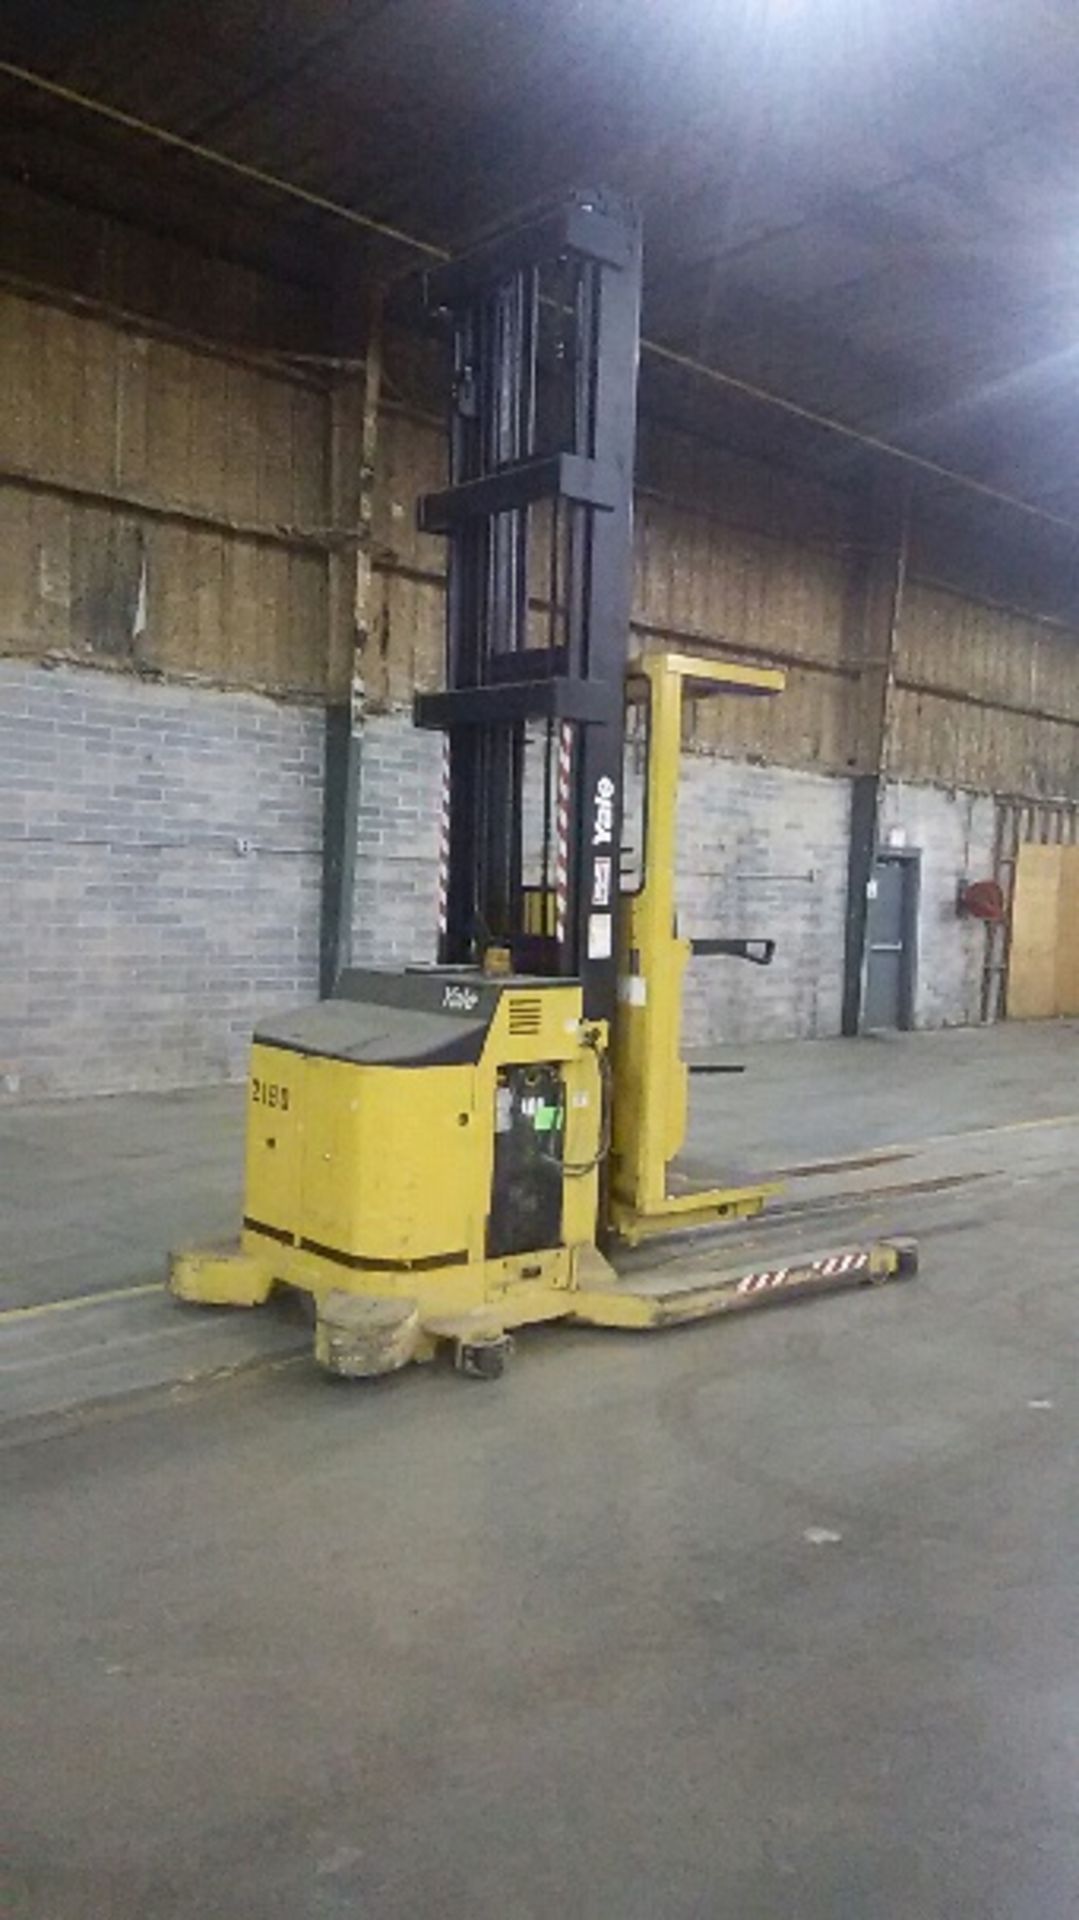 2005 YALE HIGH LEVEL ORDER PICKER FORK LIFT  MODEL NO# SS030BEN24TE155 HOURS 2999 MAX MAST HEIGHT - Image 7 of 7